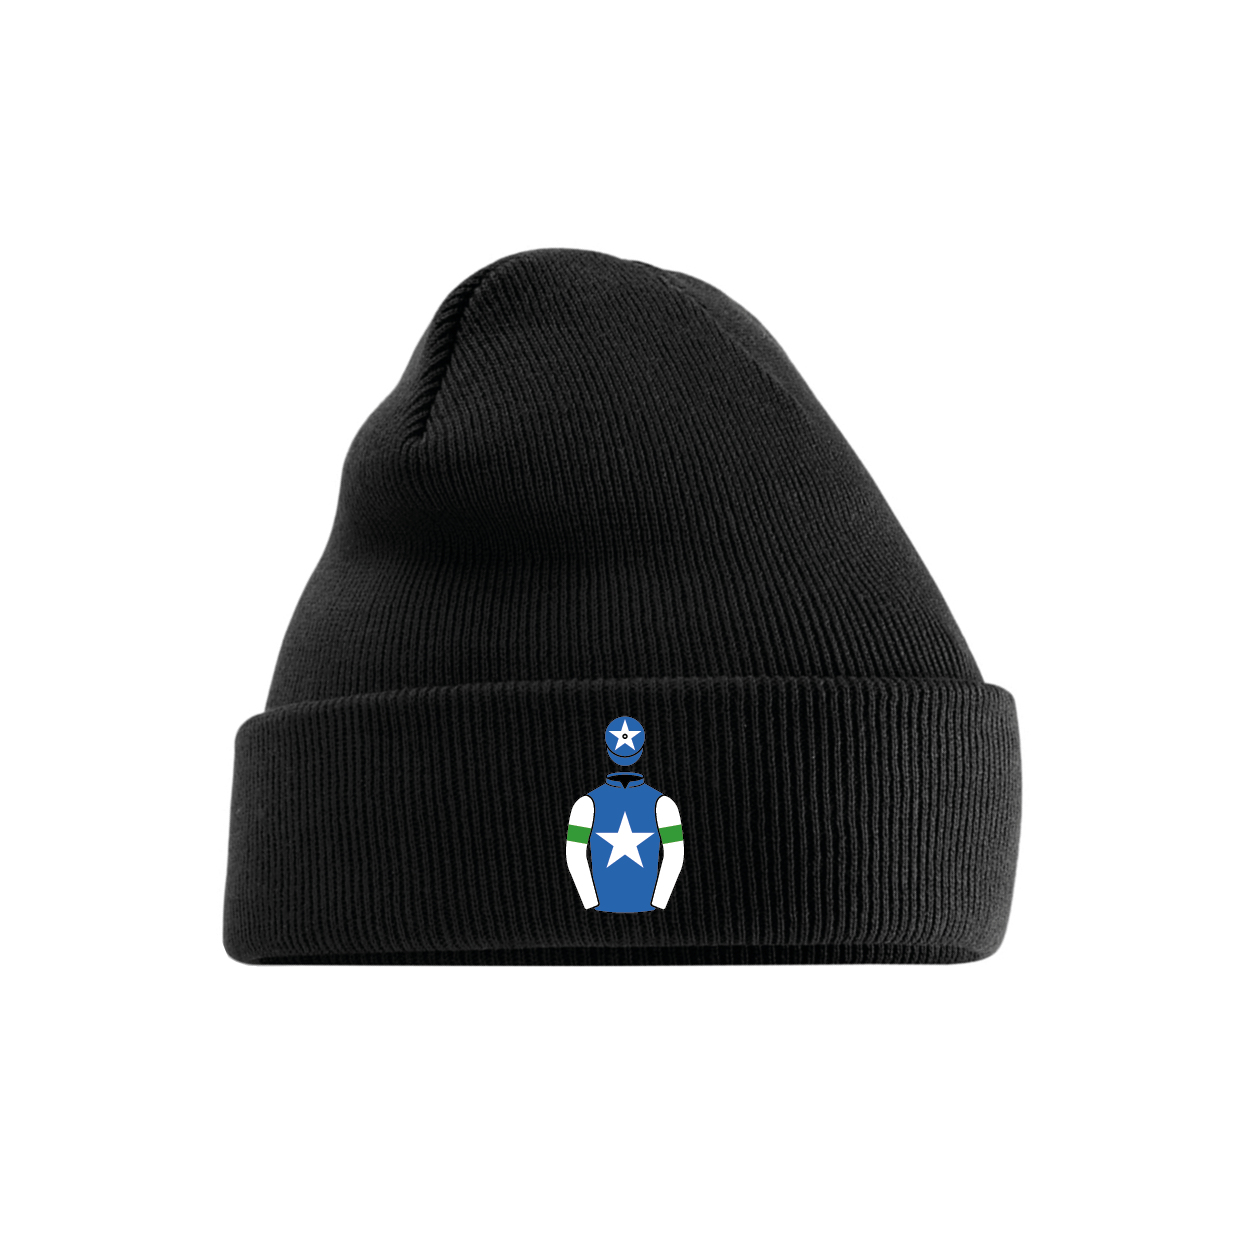 Babbitt Racing Embroidered Cuffed Beanie - Hacked Up